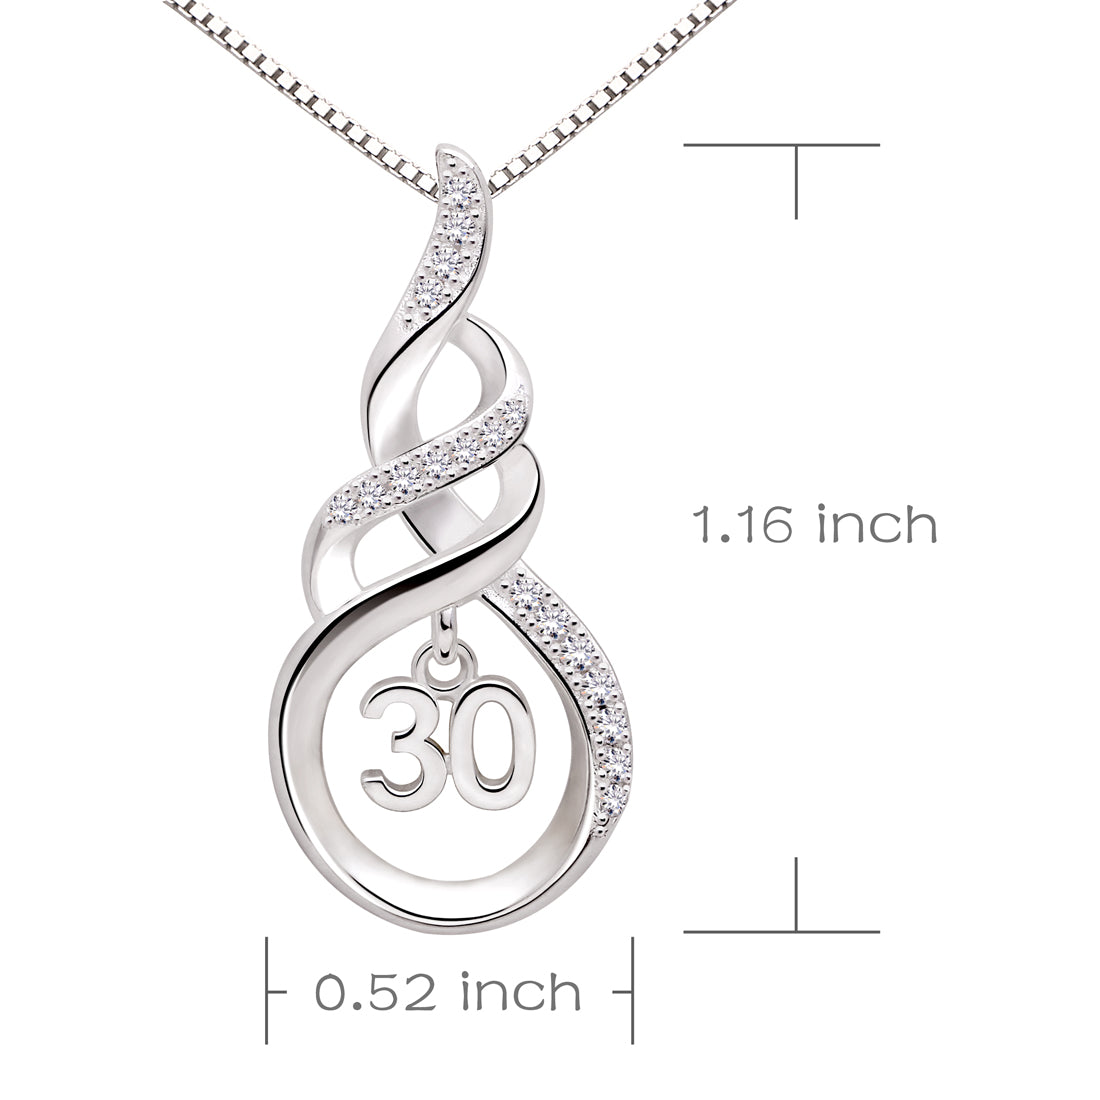 ALOV Jewelry Sterling Silver 30th Birthday Anniversary Lucky Number 30 Cubic Zirconia Pendant Necklace